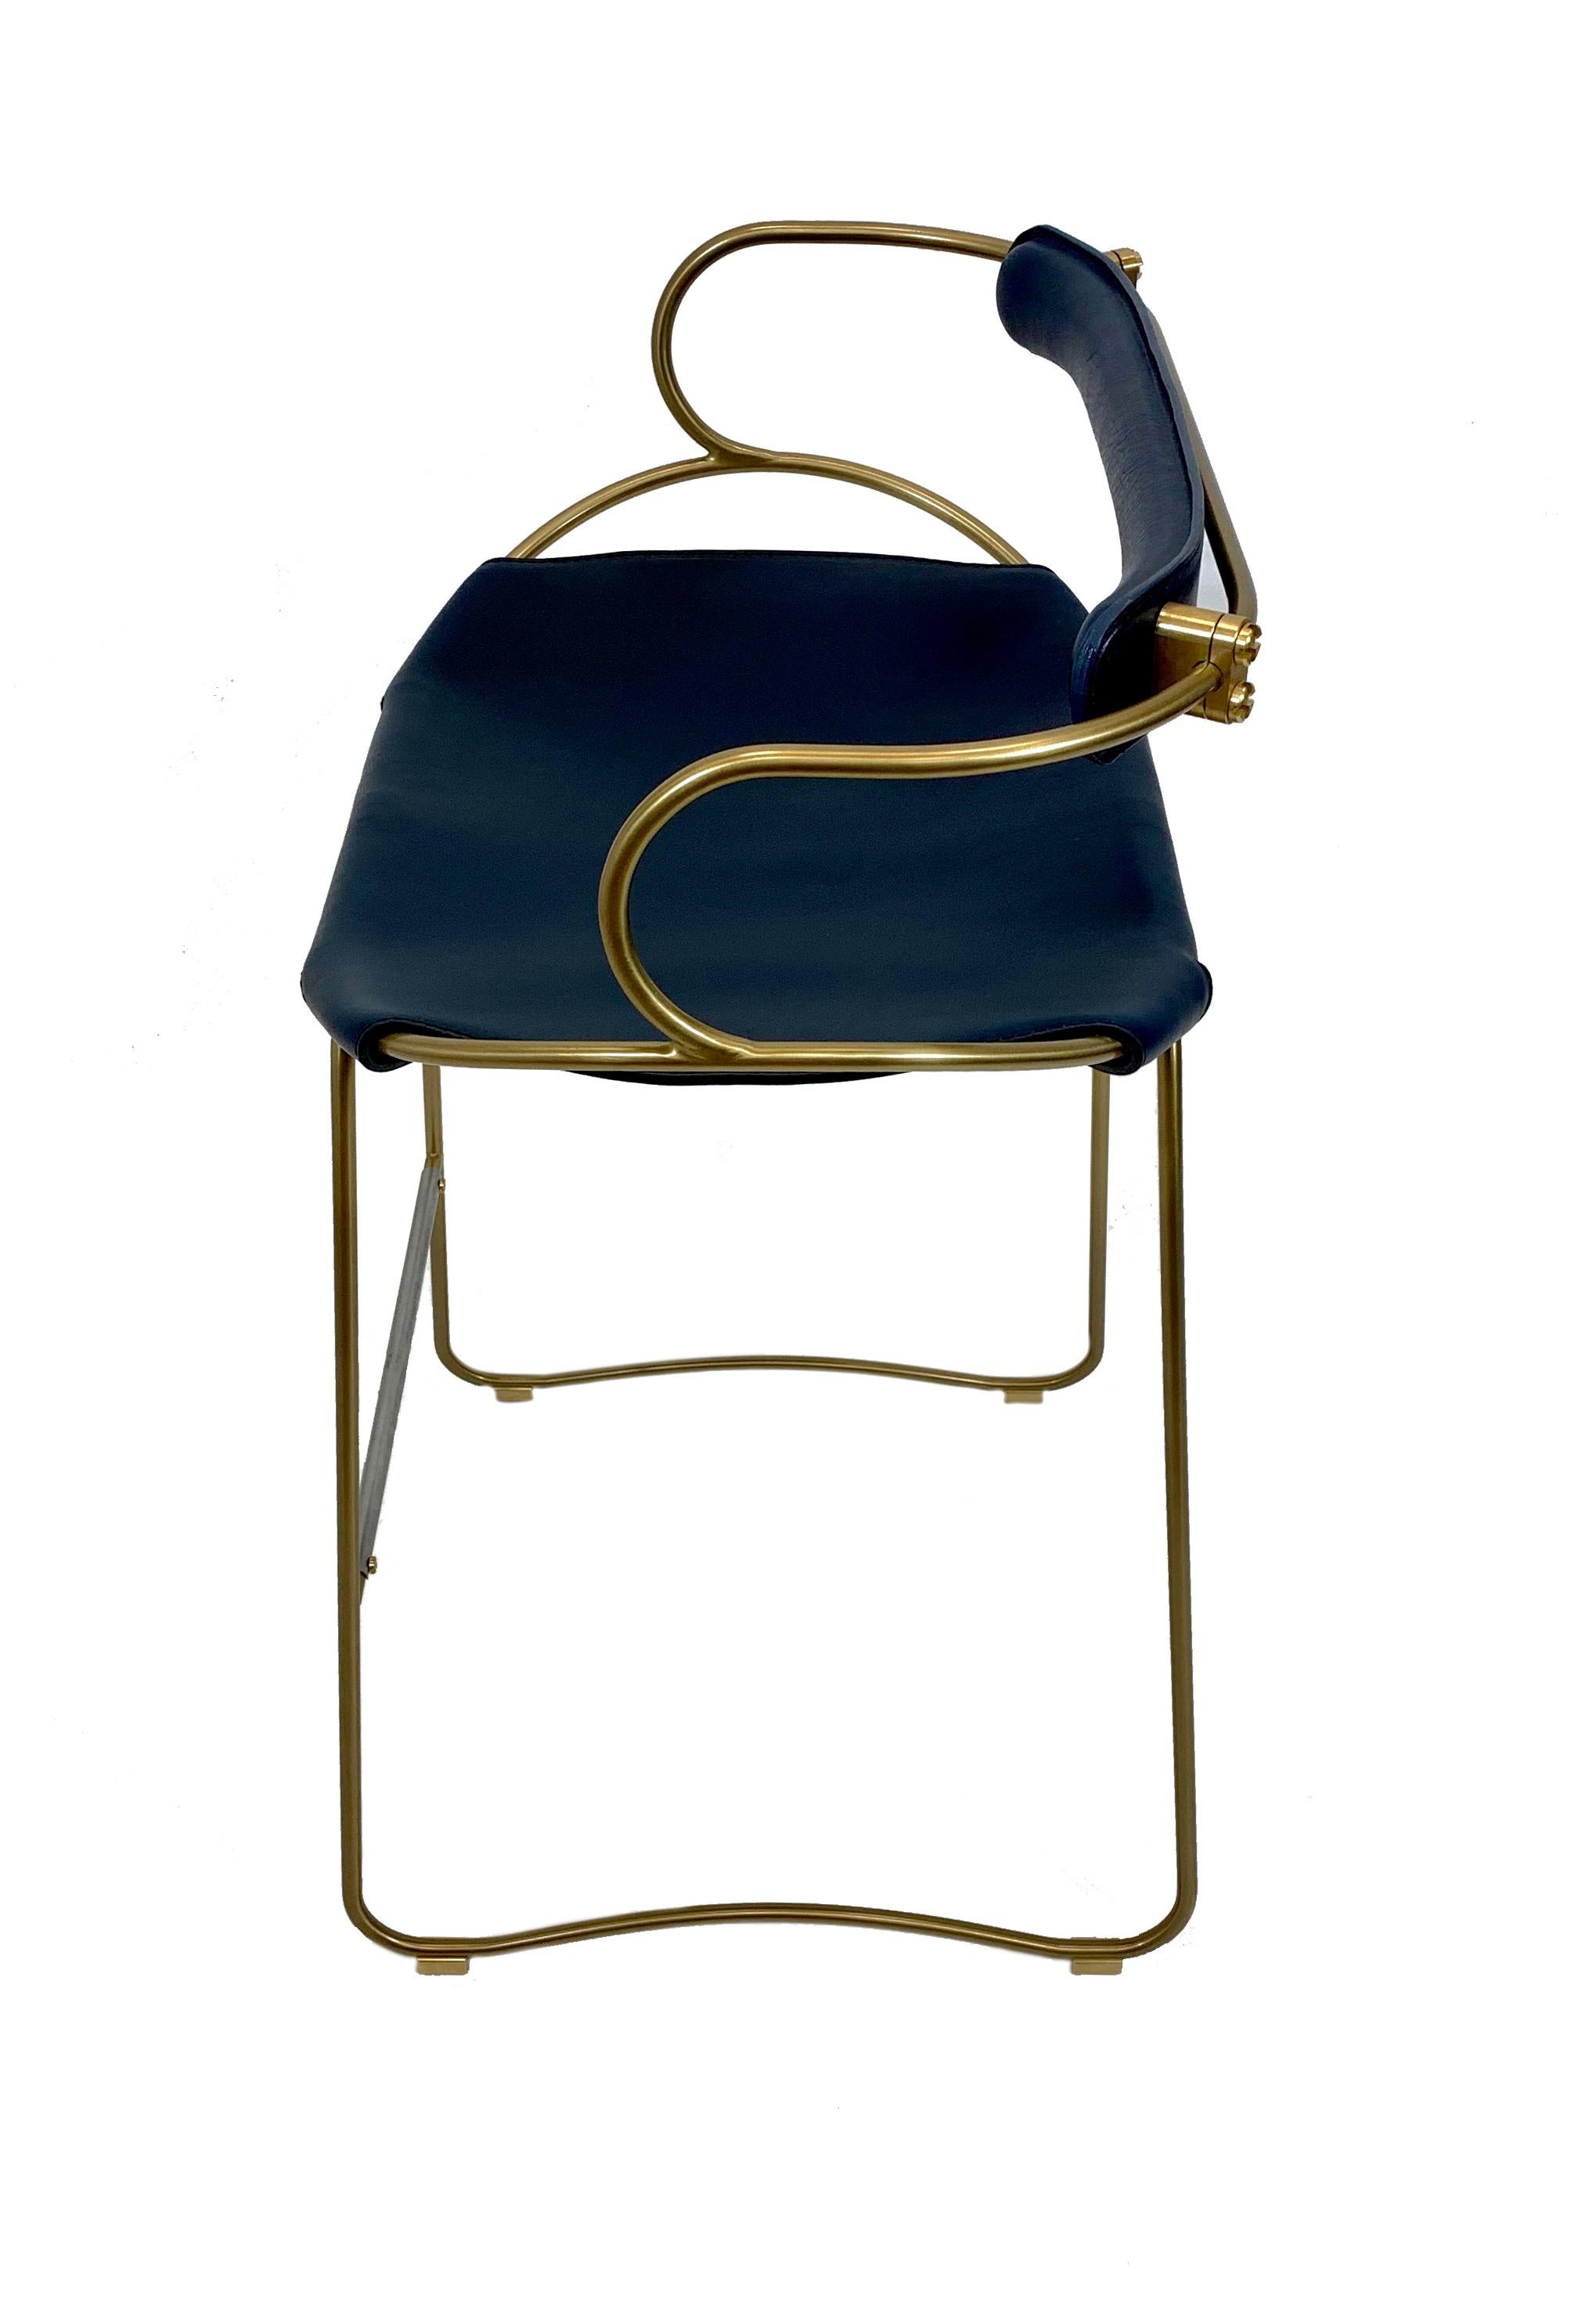 Modern Sculptural Contemporary Barstool w Backrest Aged Brass Steel & Navy Blue Leather For Sale